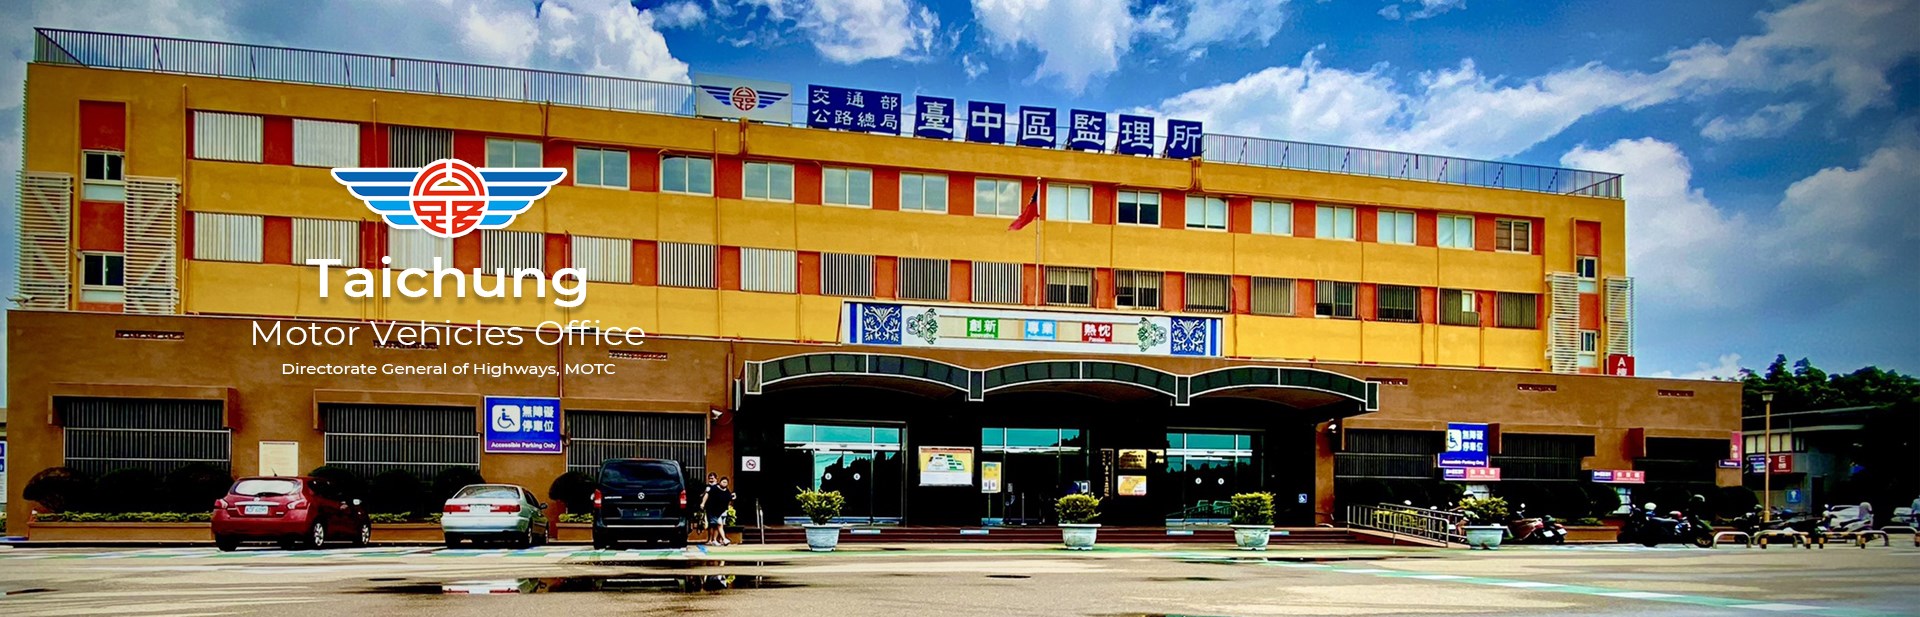 Welcome to Taichung Motor Vehicles Office